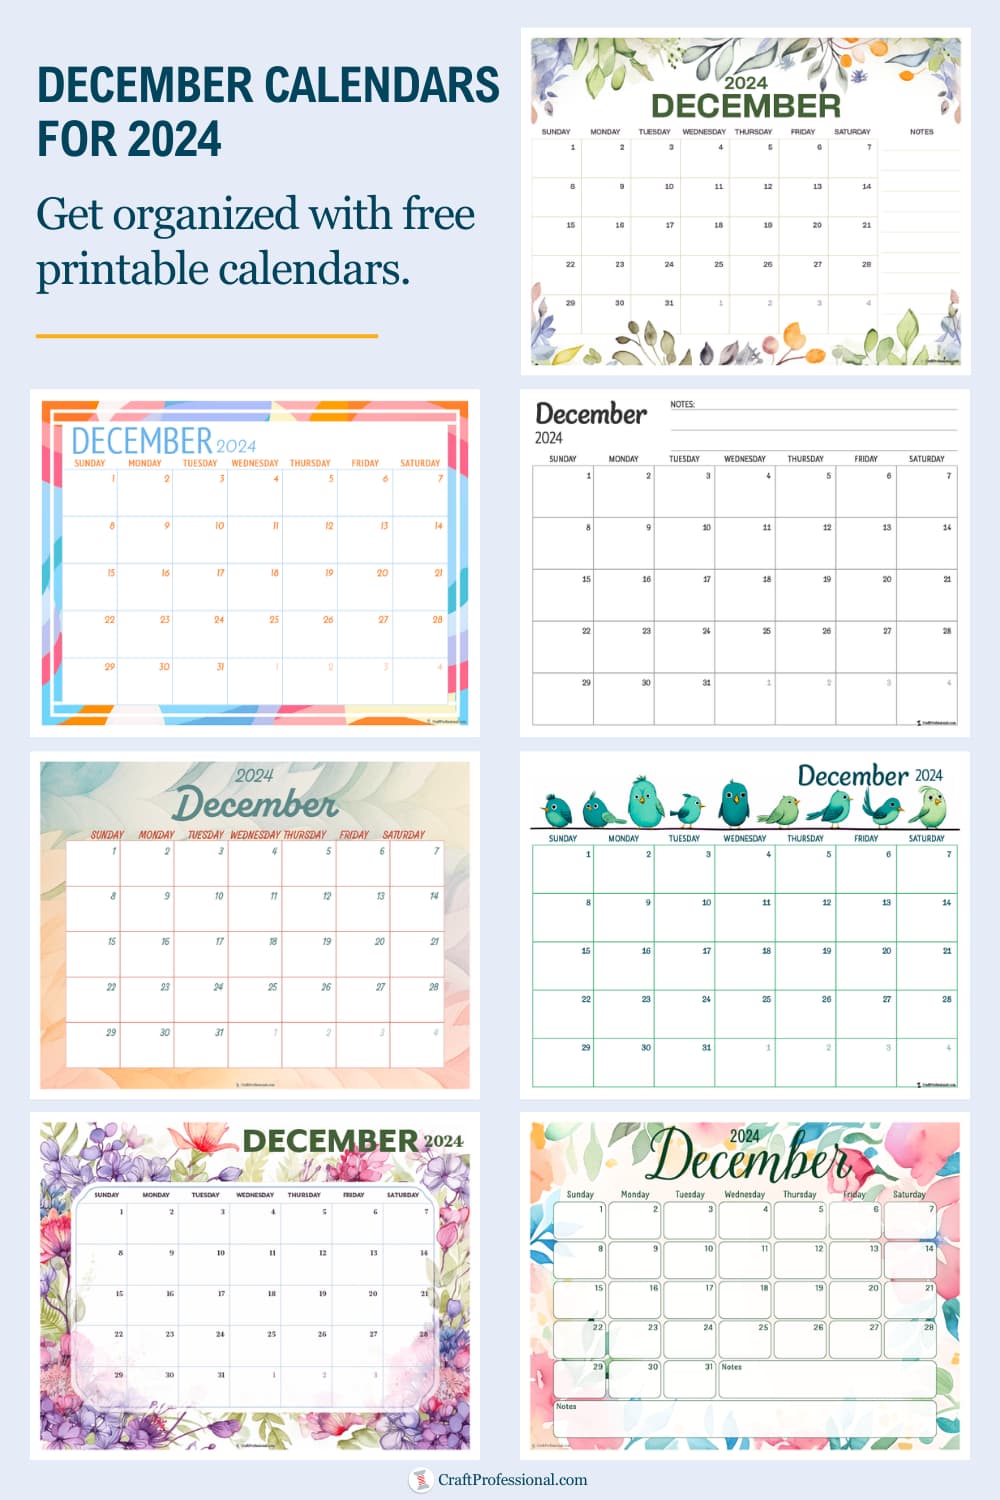 Collage of printable calendars. Text - December calendars for 2024. Get organized with free printable calendars.